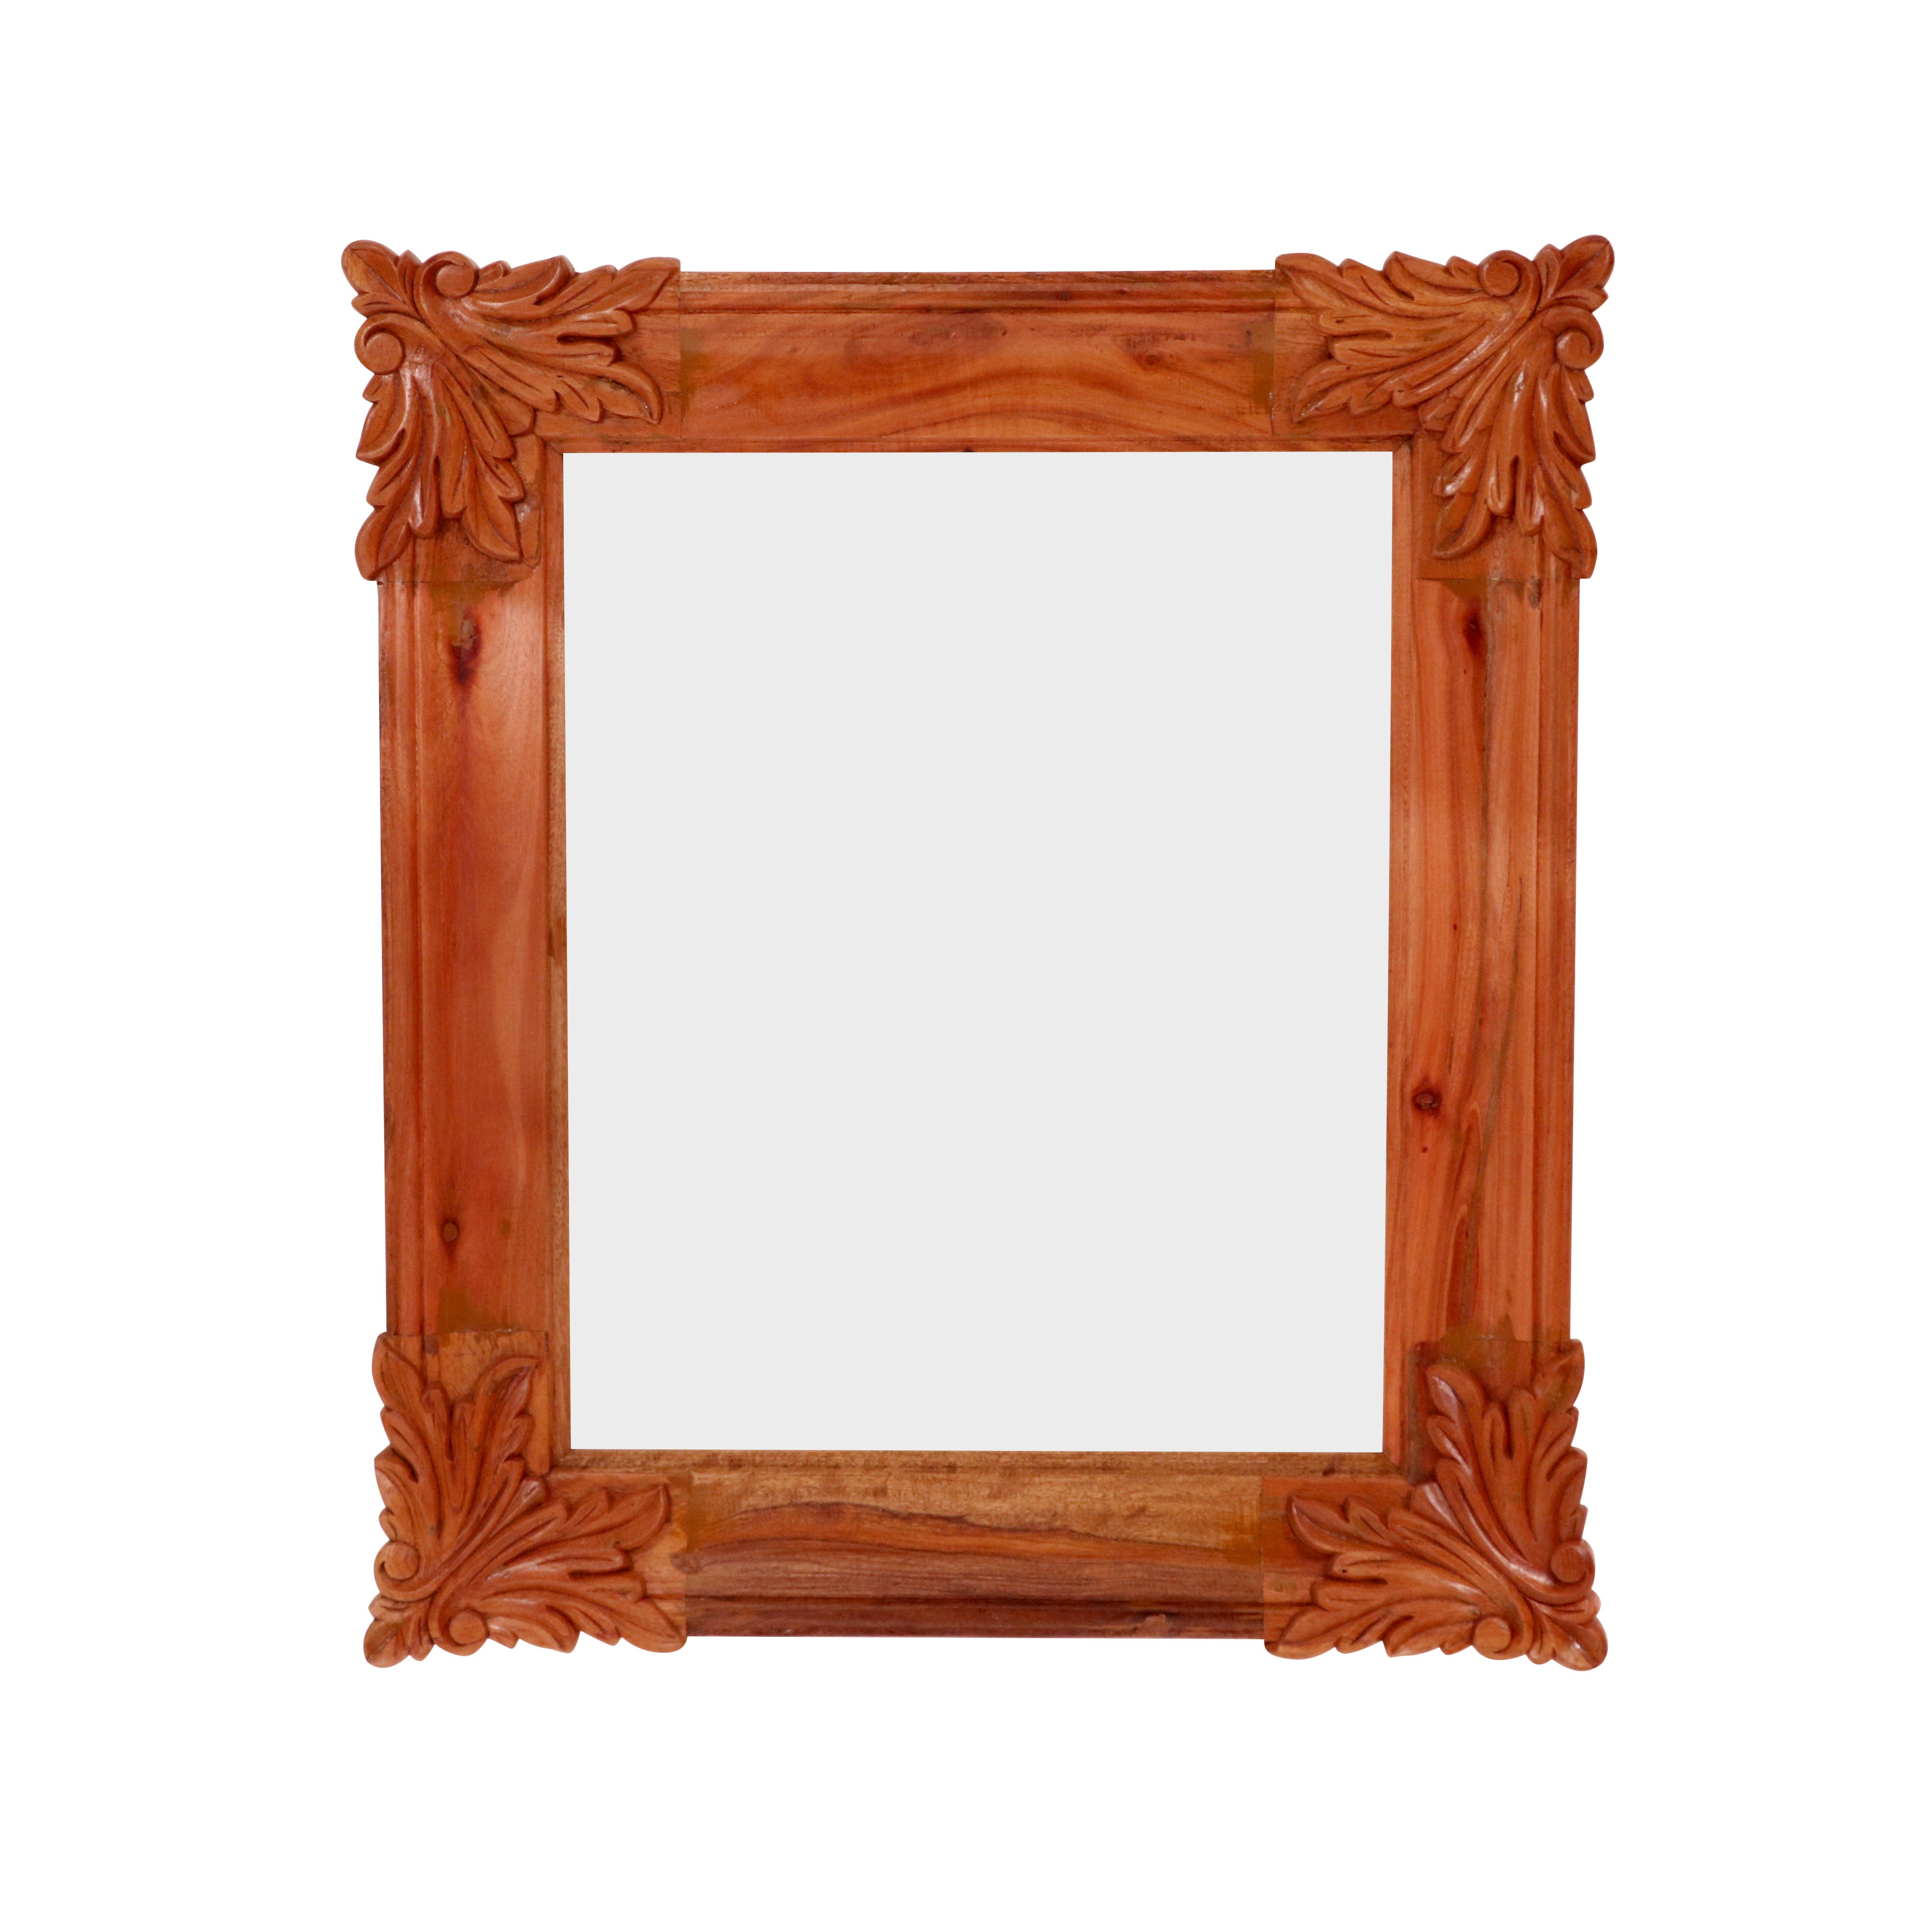 Ethnic Simple Handmade Corner Carved Wooden Wall Mirror Frame for Home Mirror